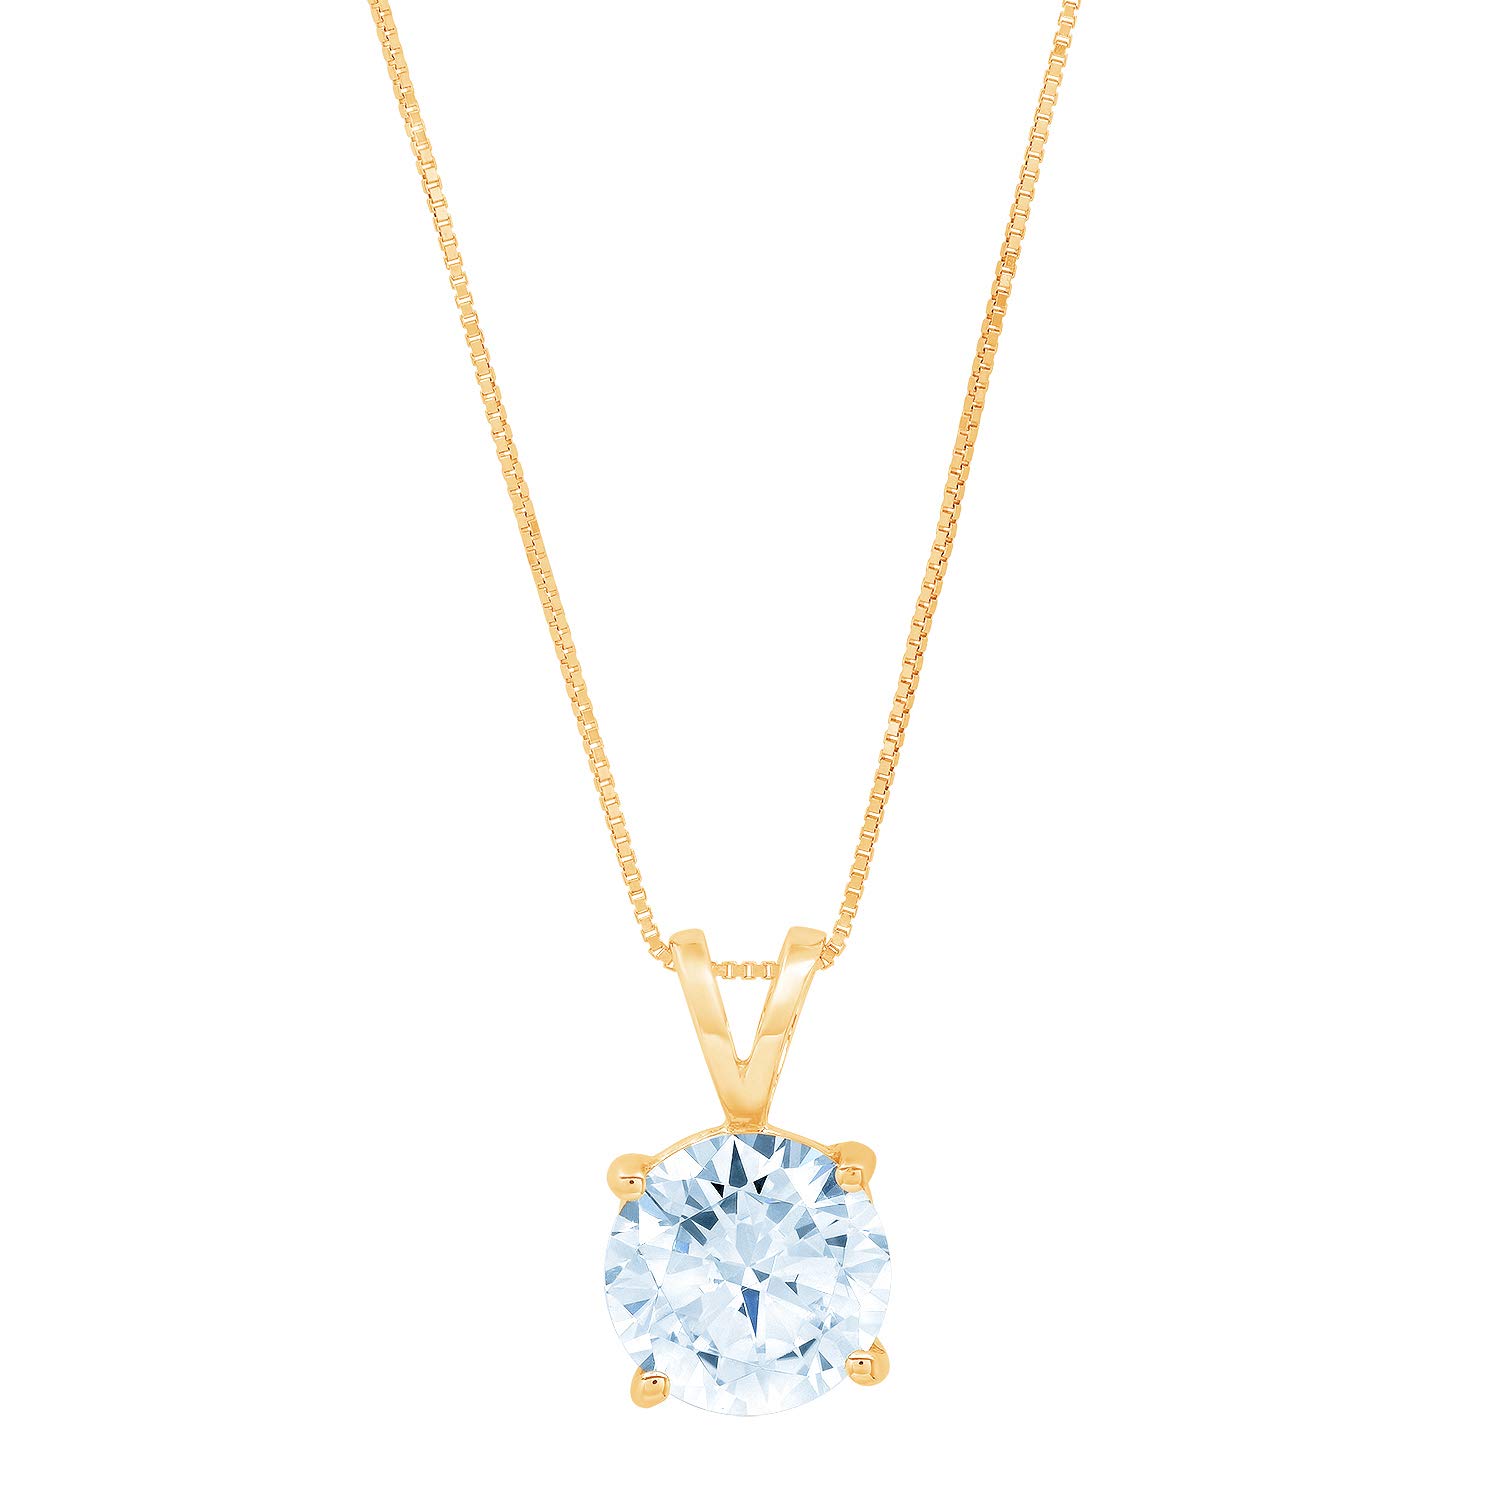 Clara Pucci 1.50 ct Brilliant Round Cut Stunning Genuine Flawless Blue Simulated Diamond Gemstone Solitaire Pendant Necklace With 18